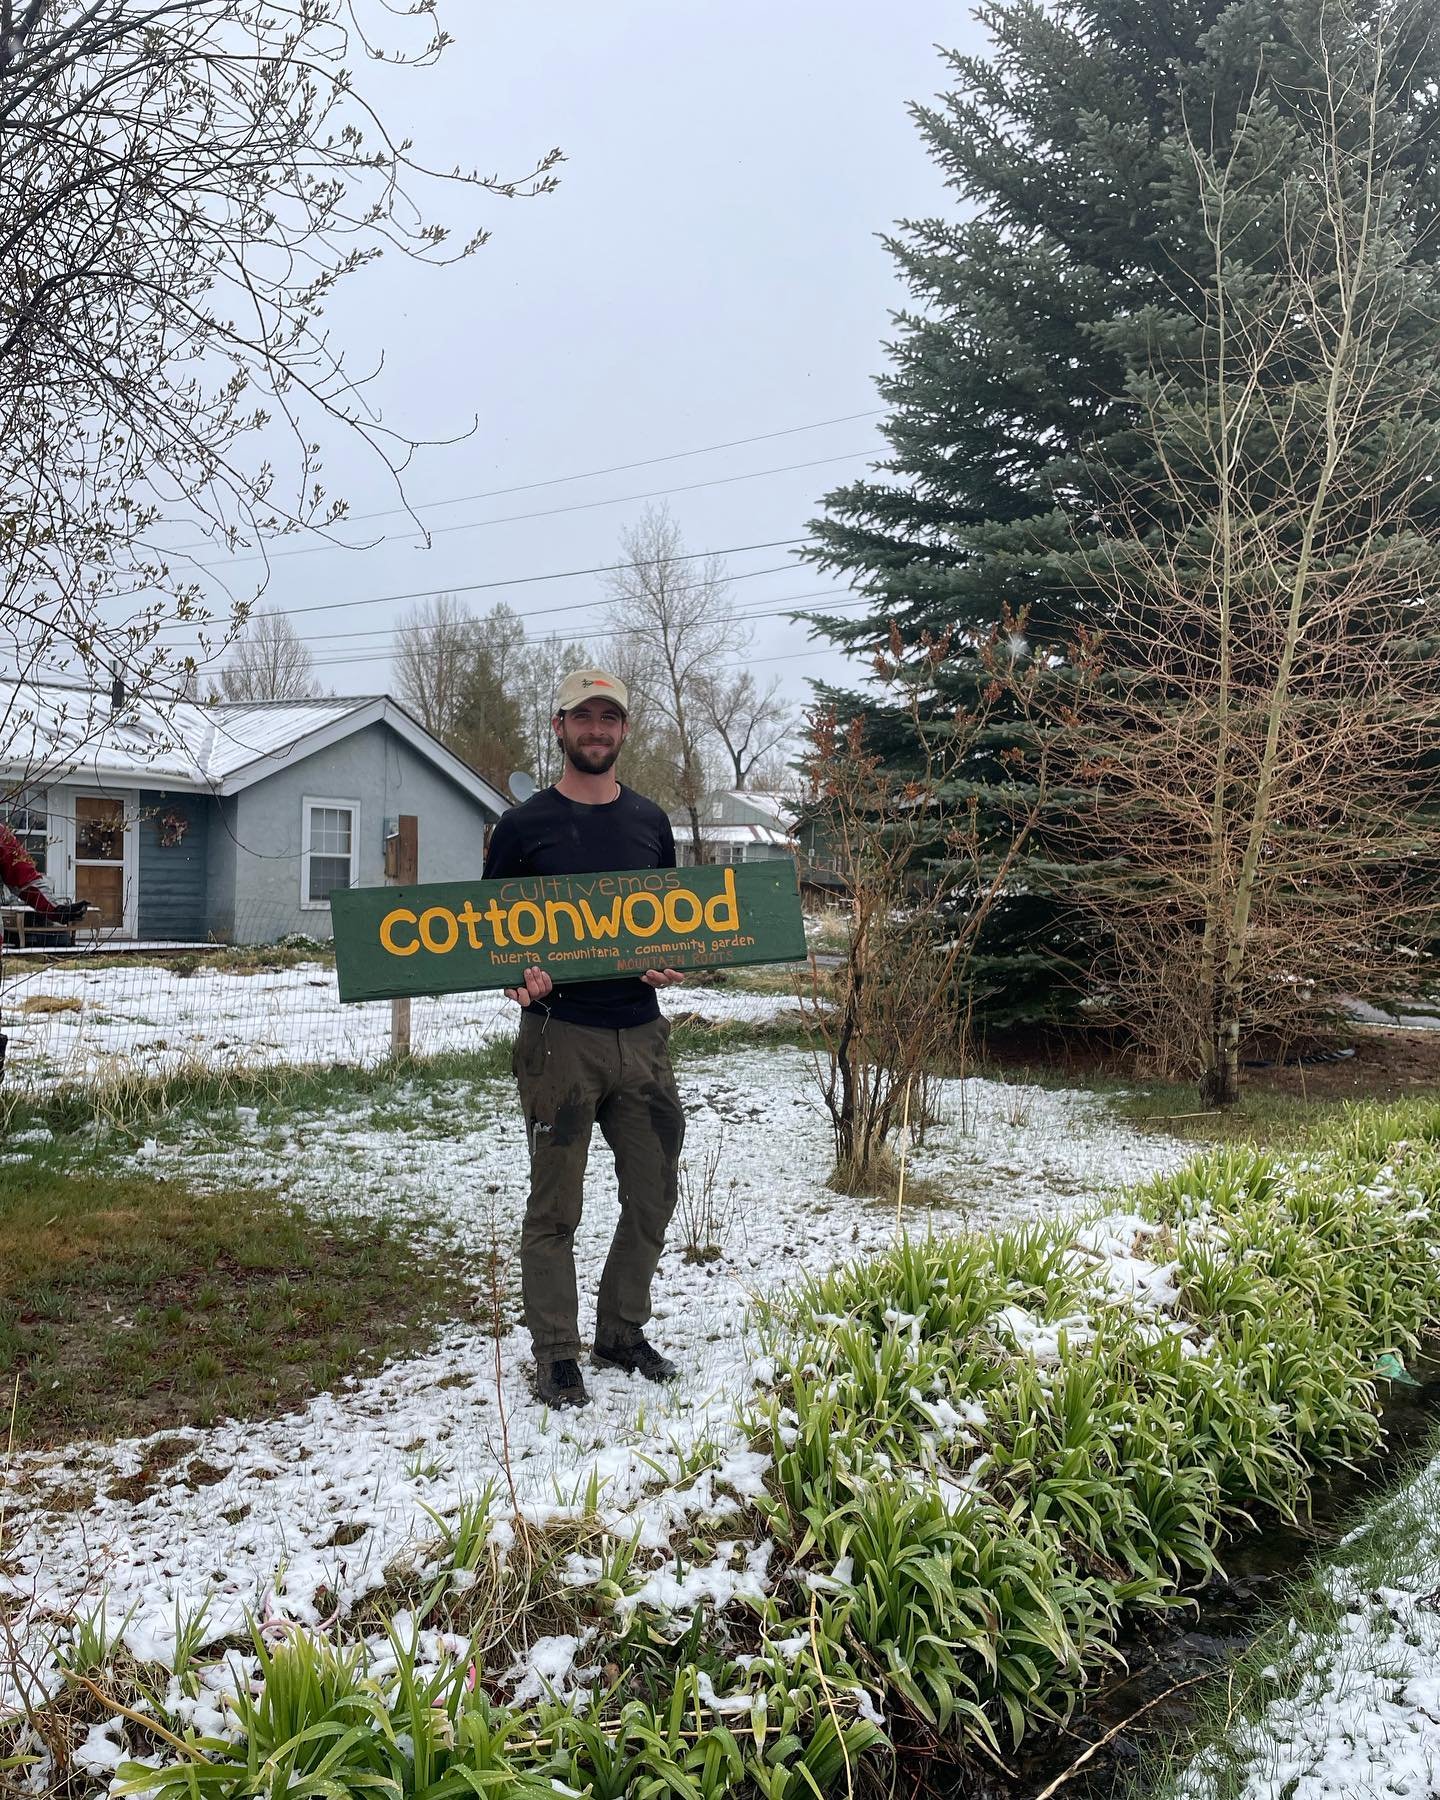 This week, we are sadly saying goodbye to Cultevemos Cottonwood, our community garden we have been working in for 14 years. Thank you so much to all of our amazing volunteers for helping us move materials and soil!! 

Reminder that we hold garden hou